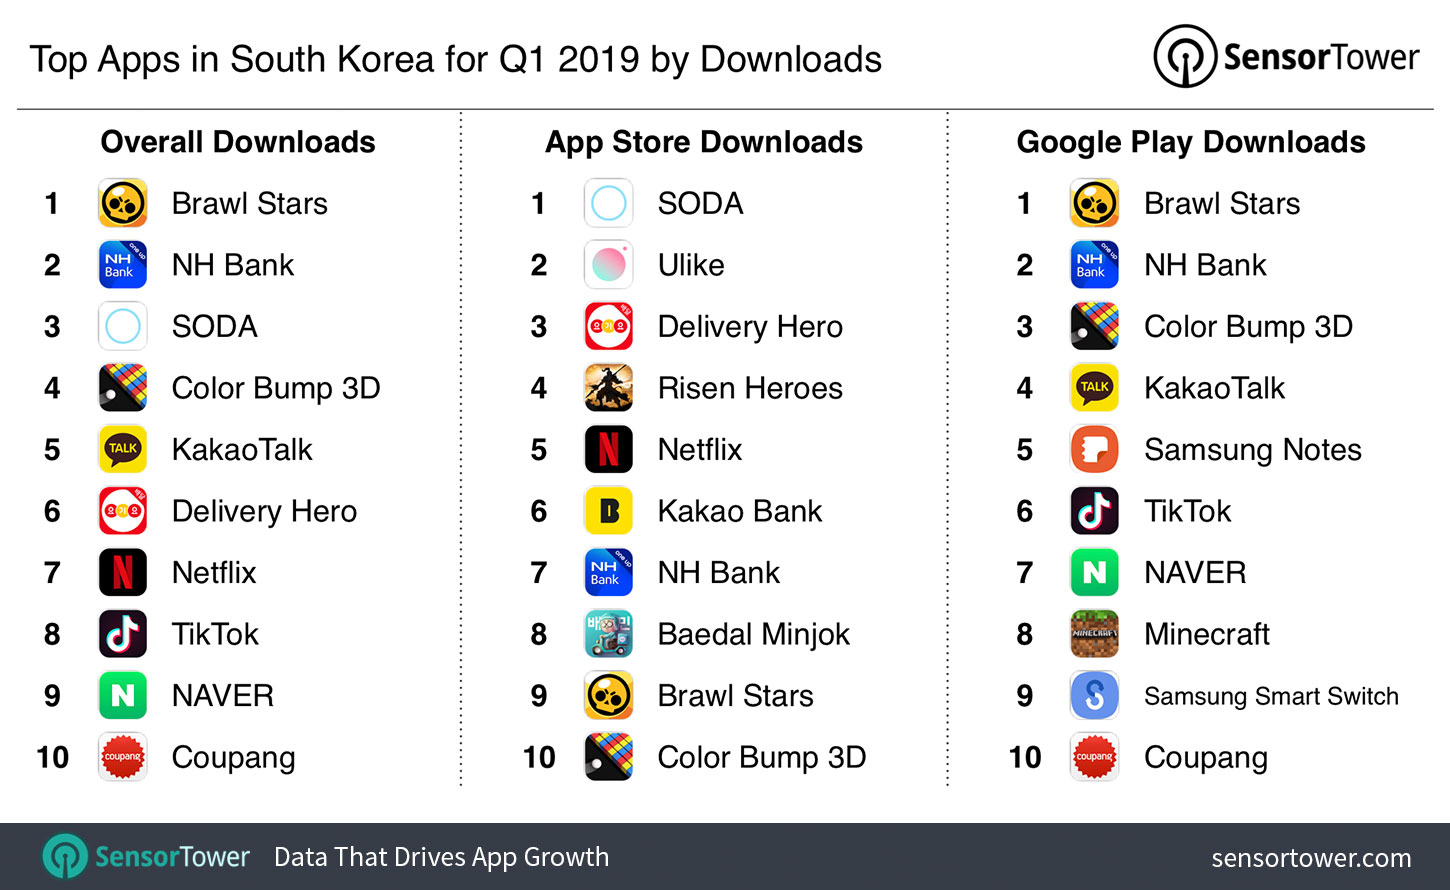 Top Apps in South Korea for Q1 2019 by Downloads